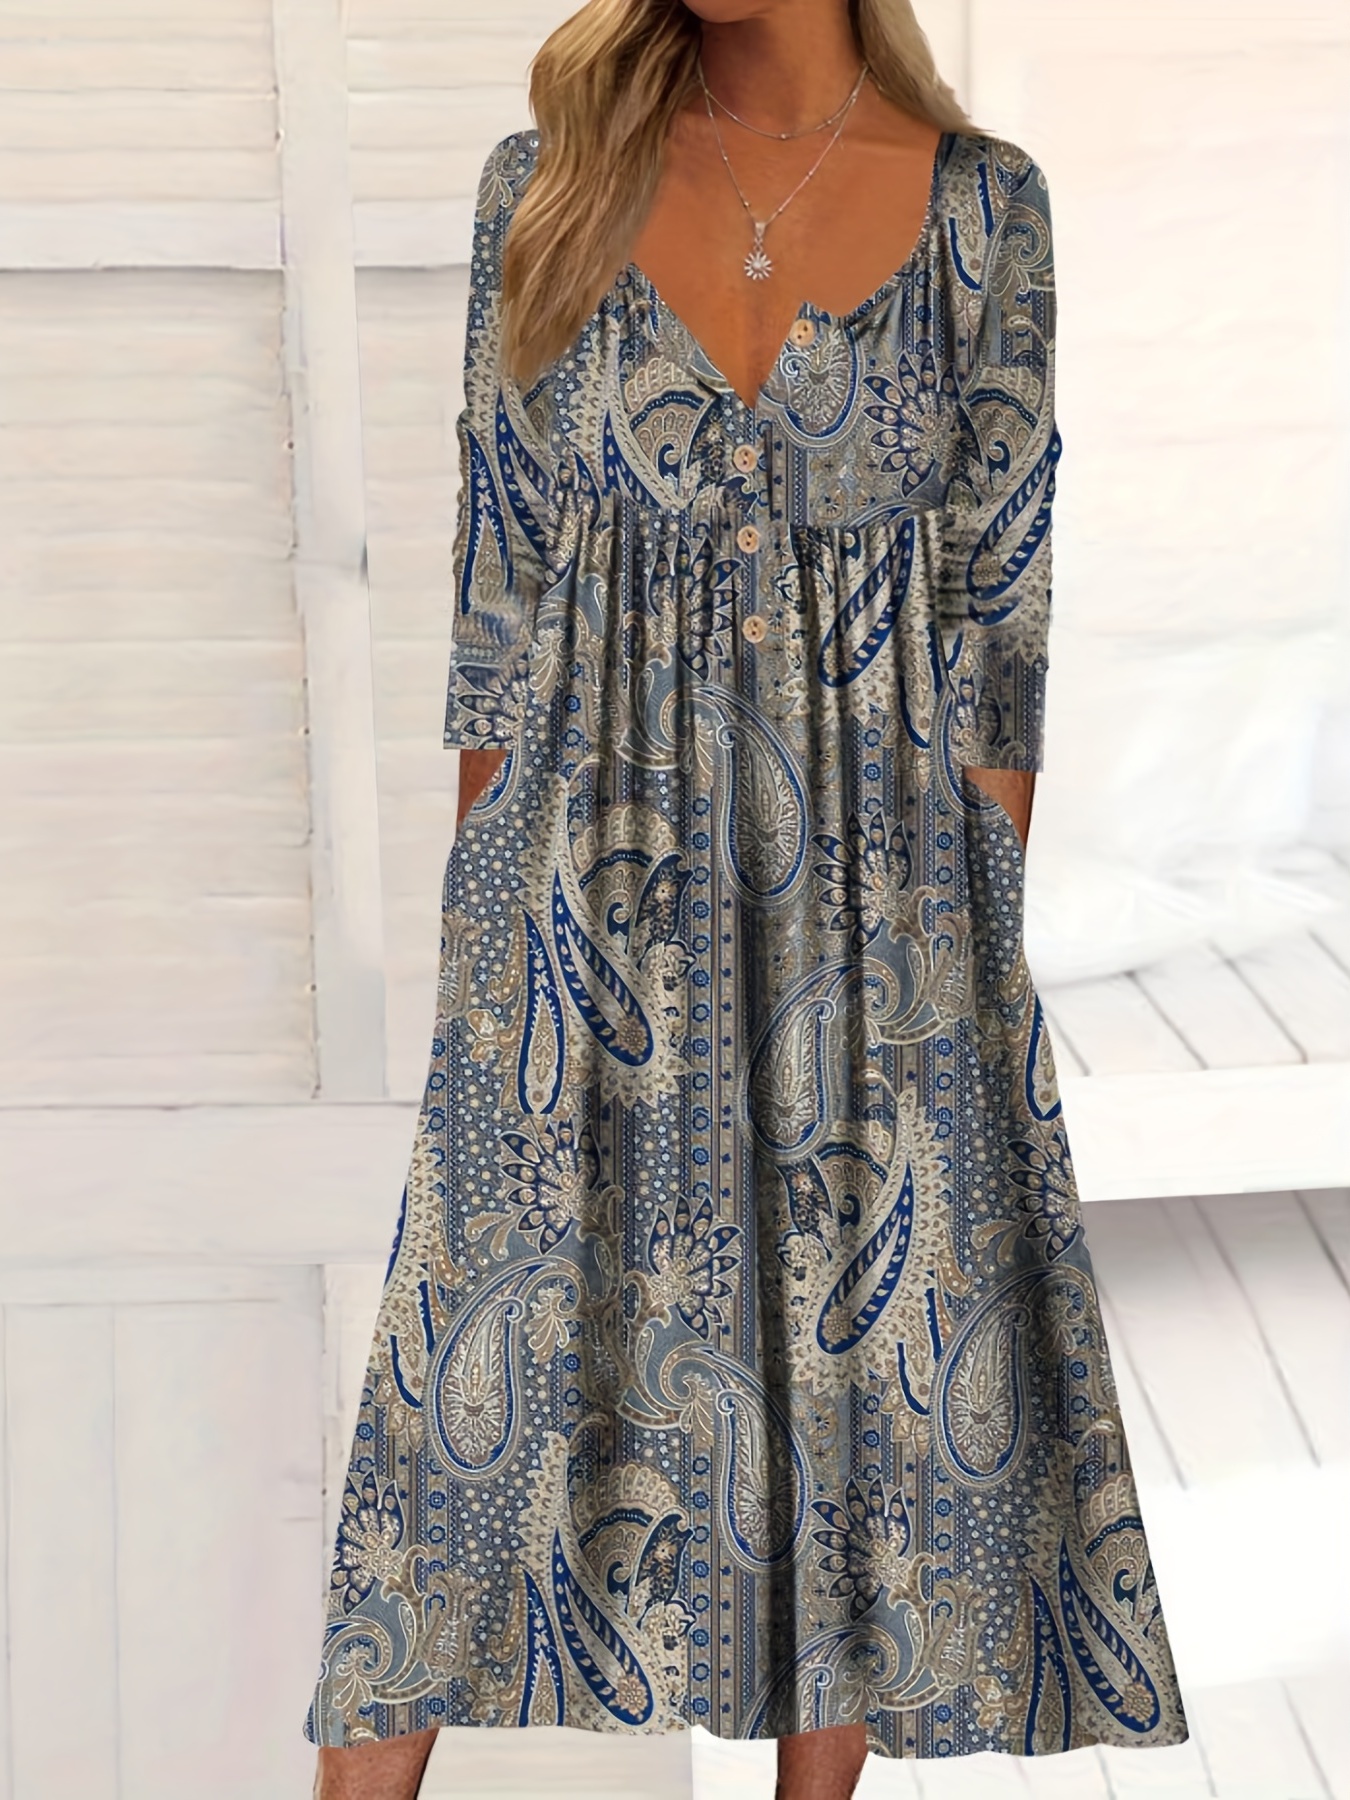 Boho Paisley Print Sleeveless Dresses, Collared Button Up A-line Under Knee  Dresses With Belted, Women's Clothings